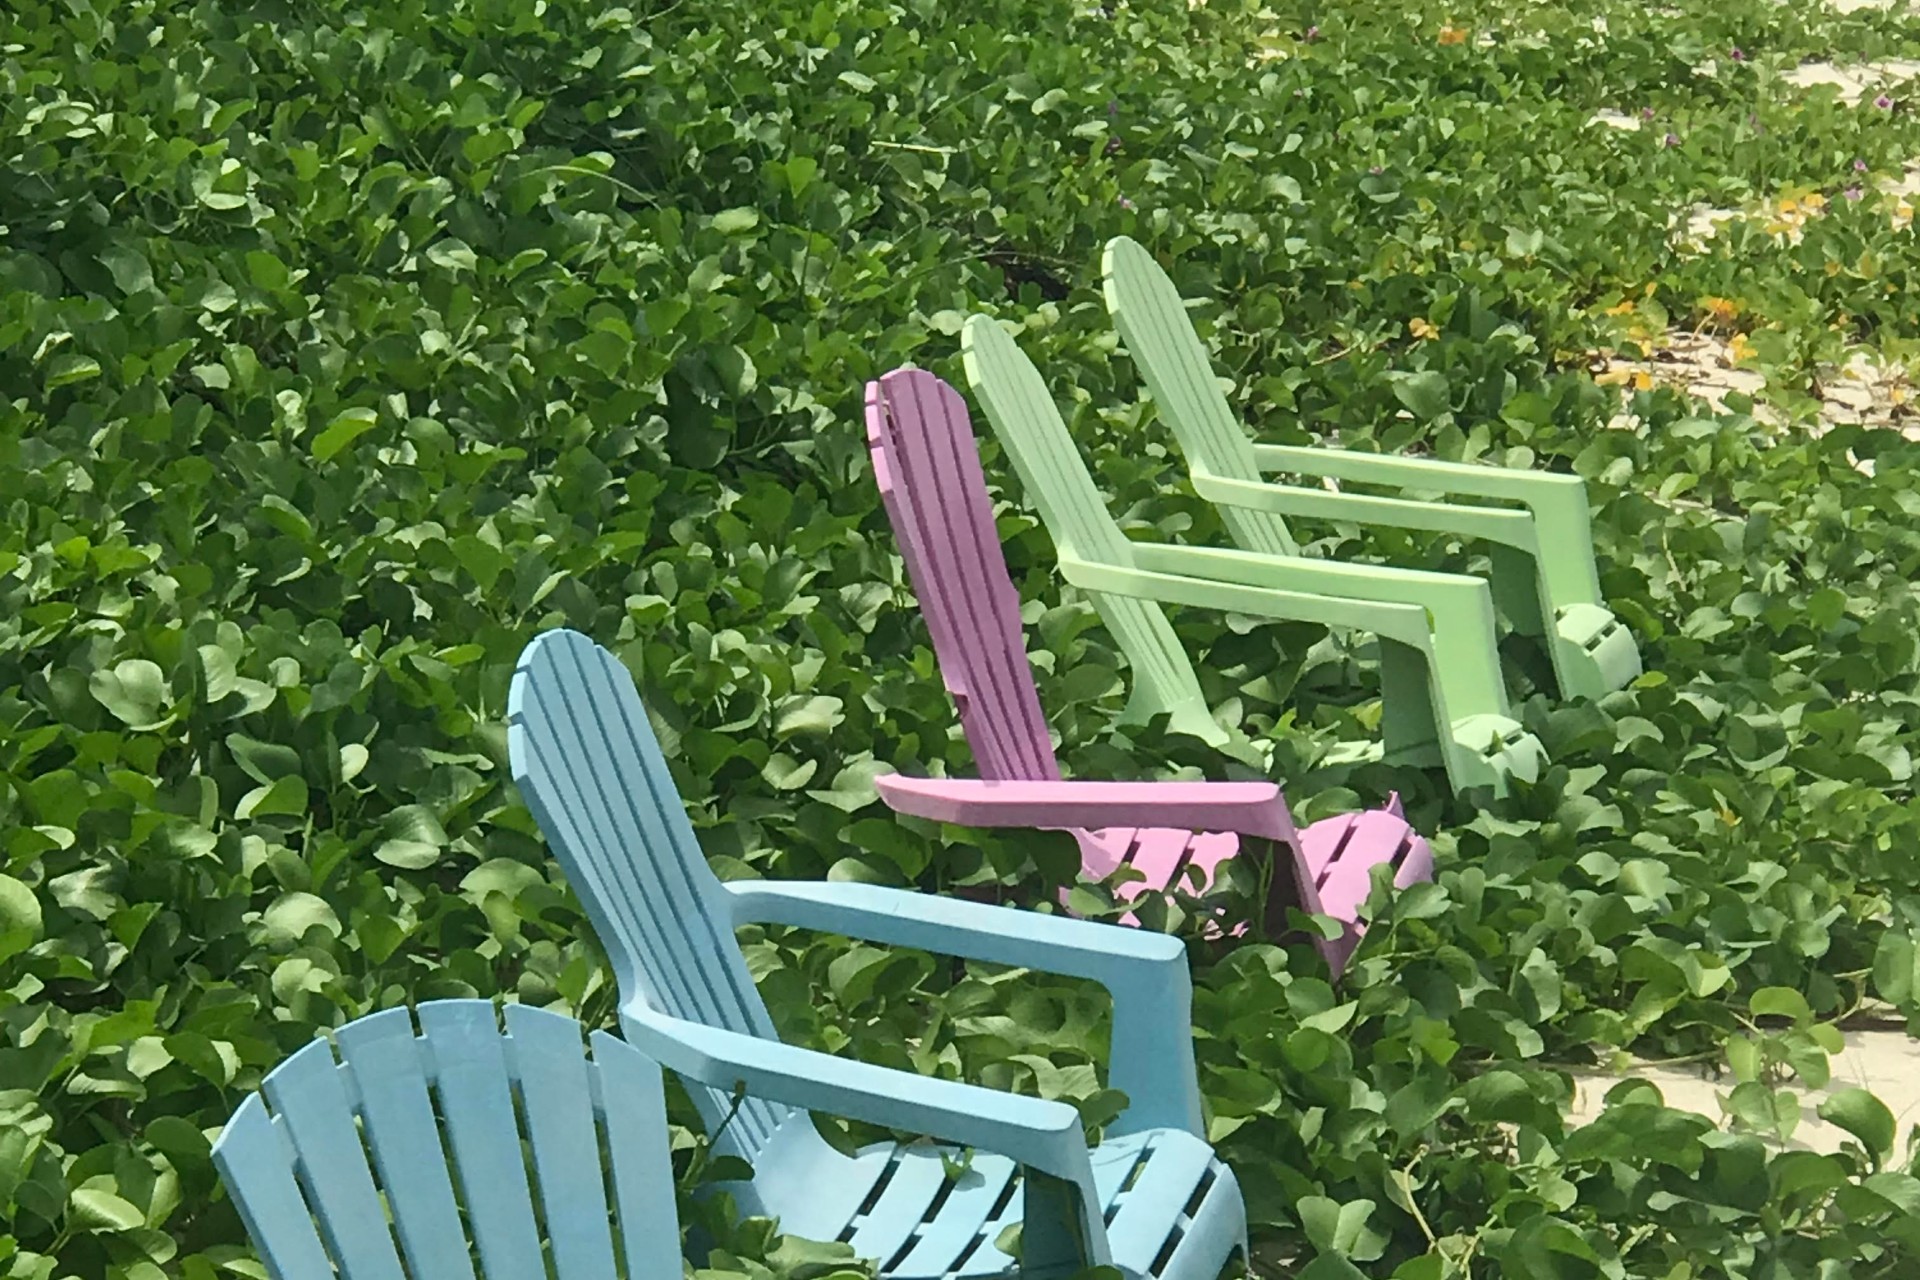 blue, pink, and green beach chairs in the sand with a vine growing over them